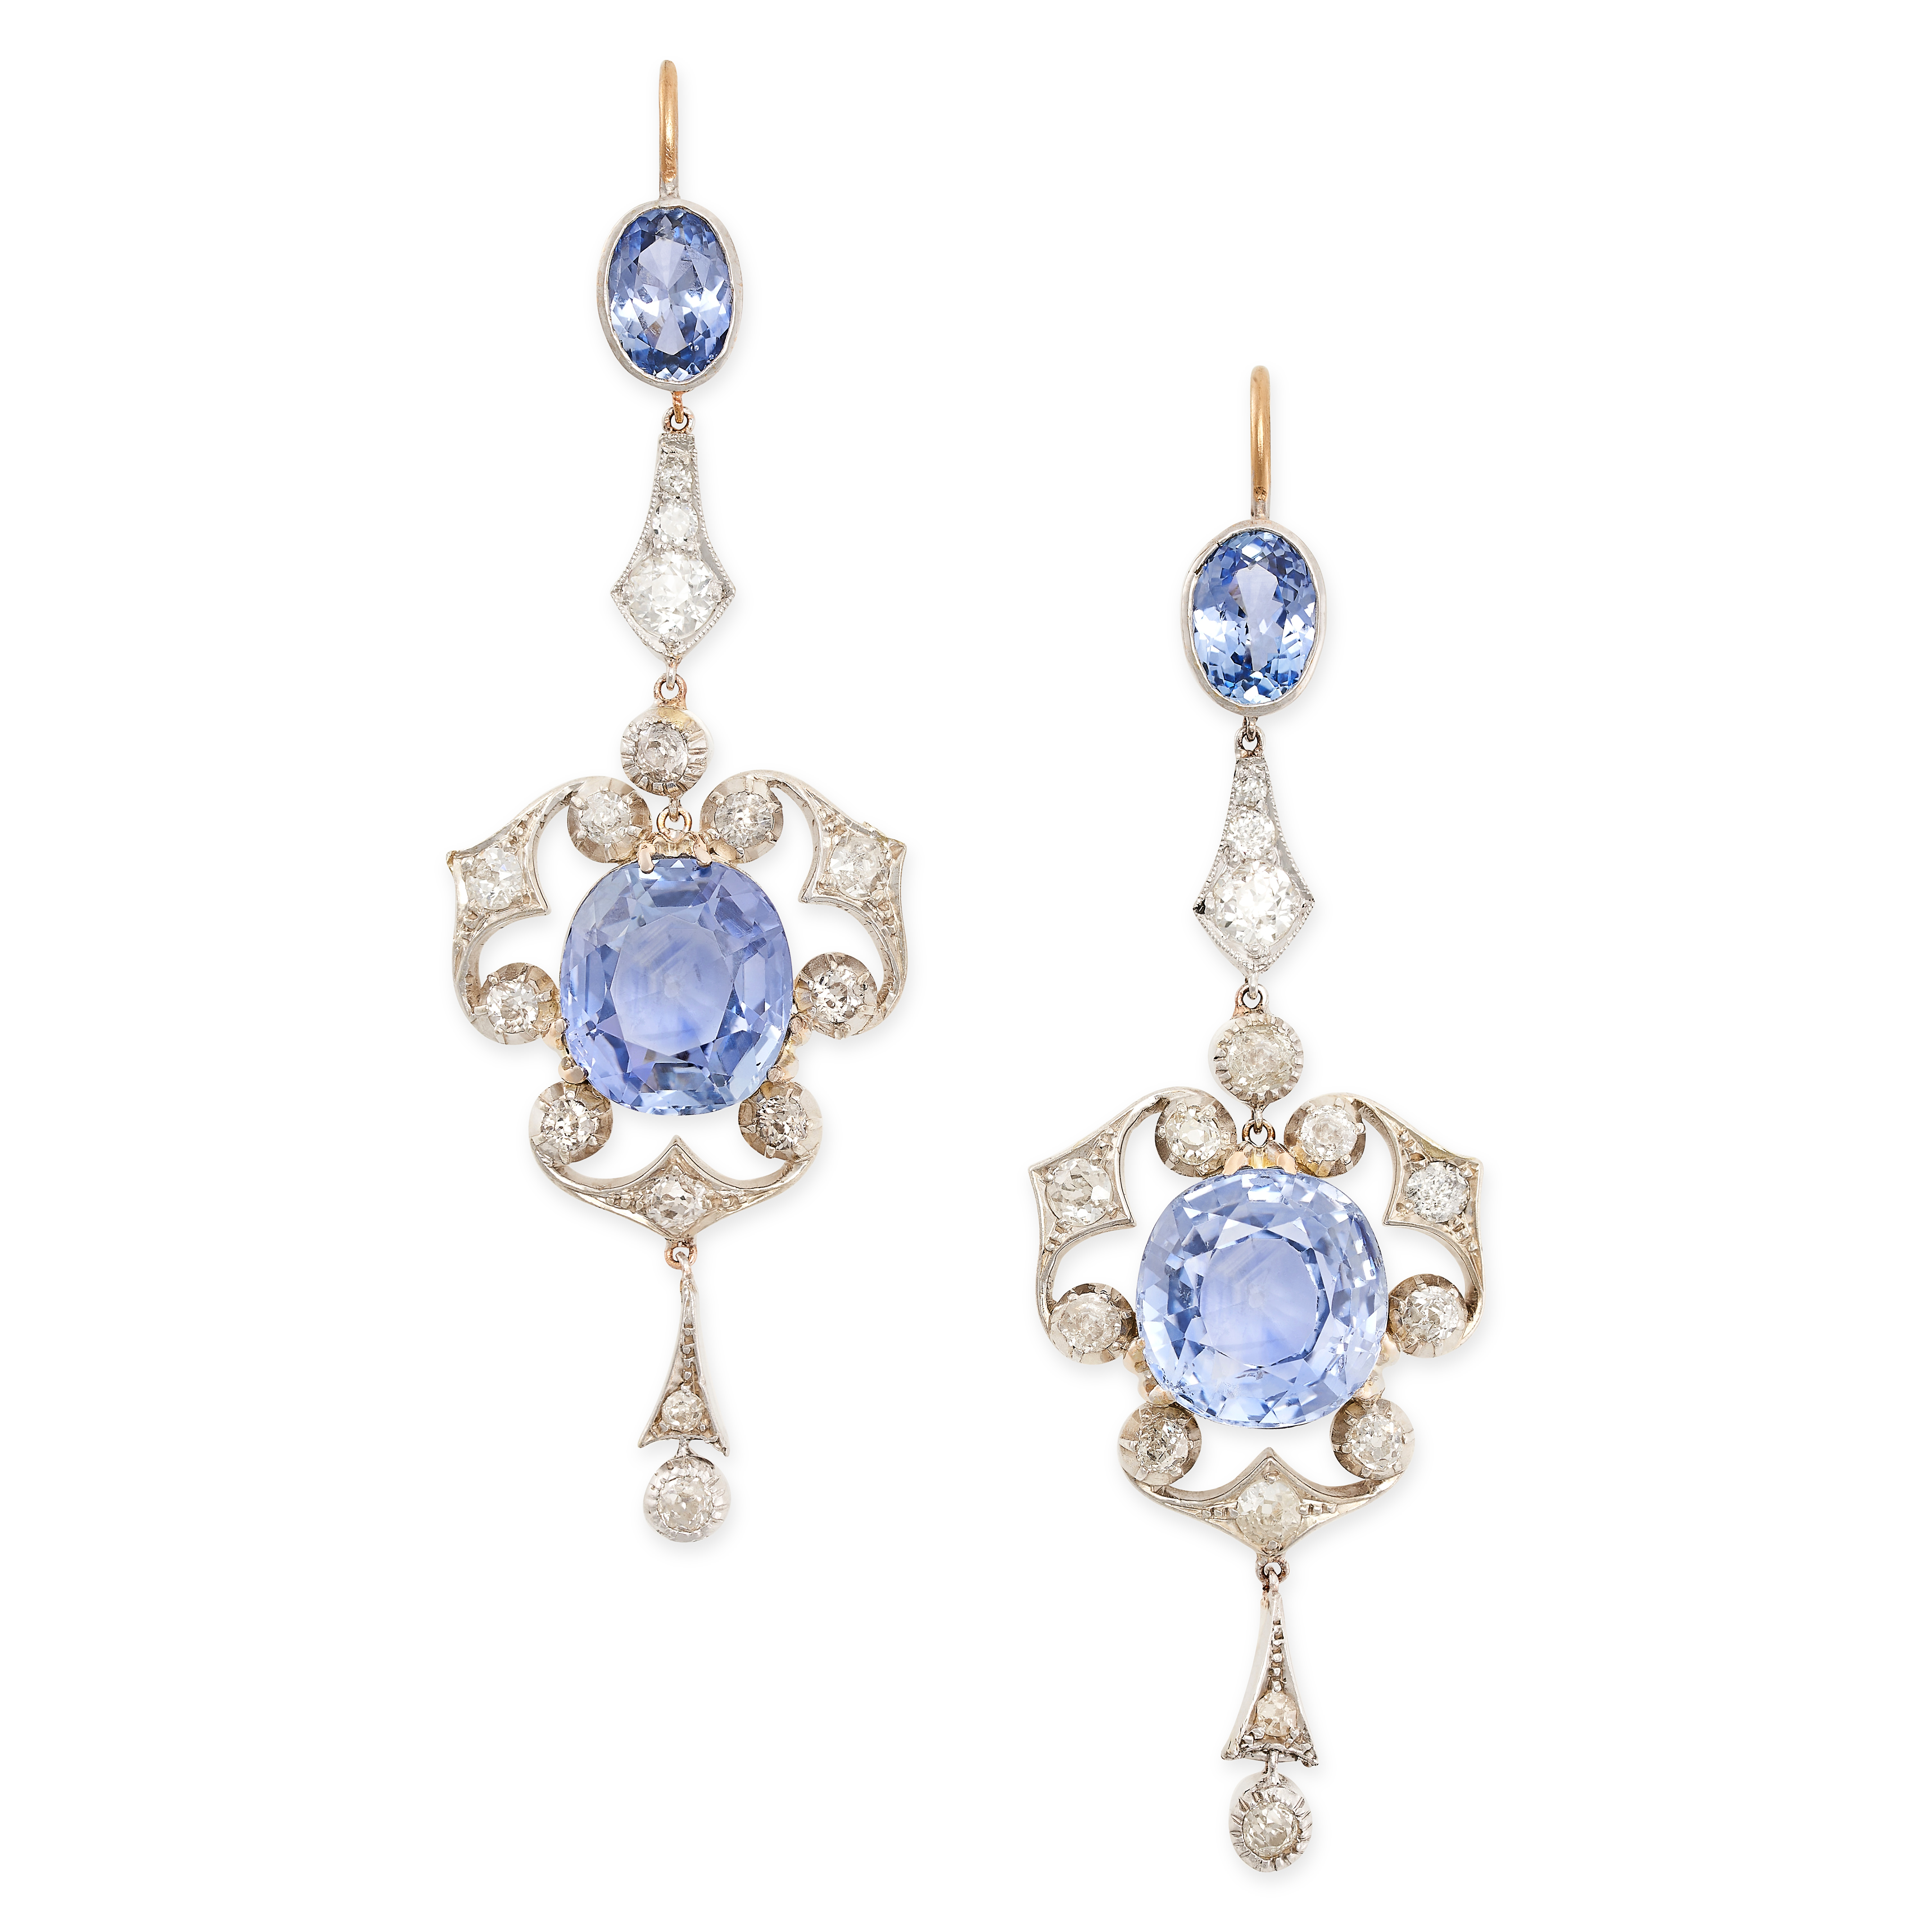 A PAIR OF CEYLON NO HEAT SAPPHIRE AND DIAMOND EARRINGS, EARLY 20TH CENTURY AND LATER in 18ct white